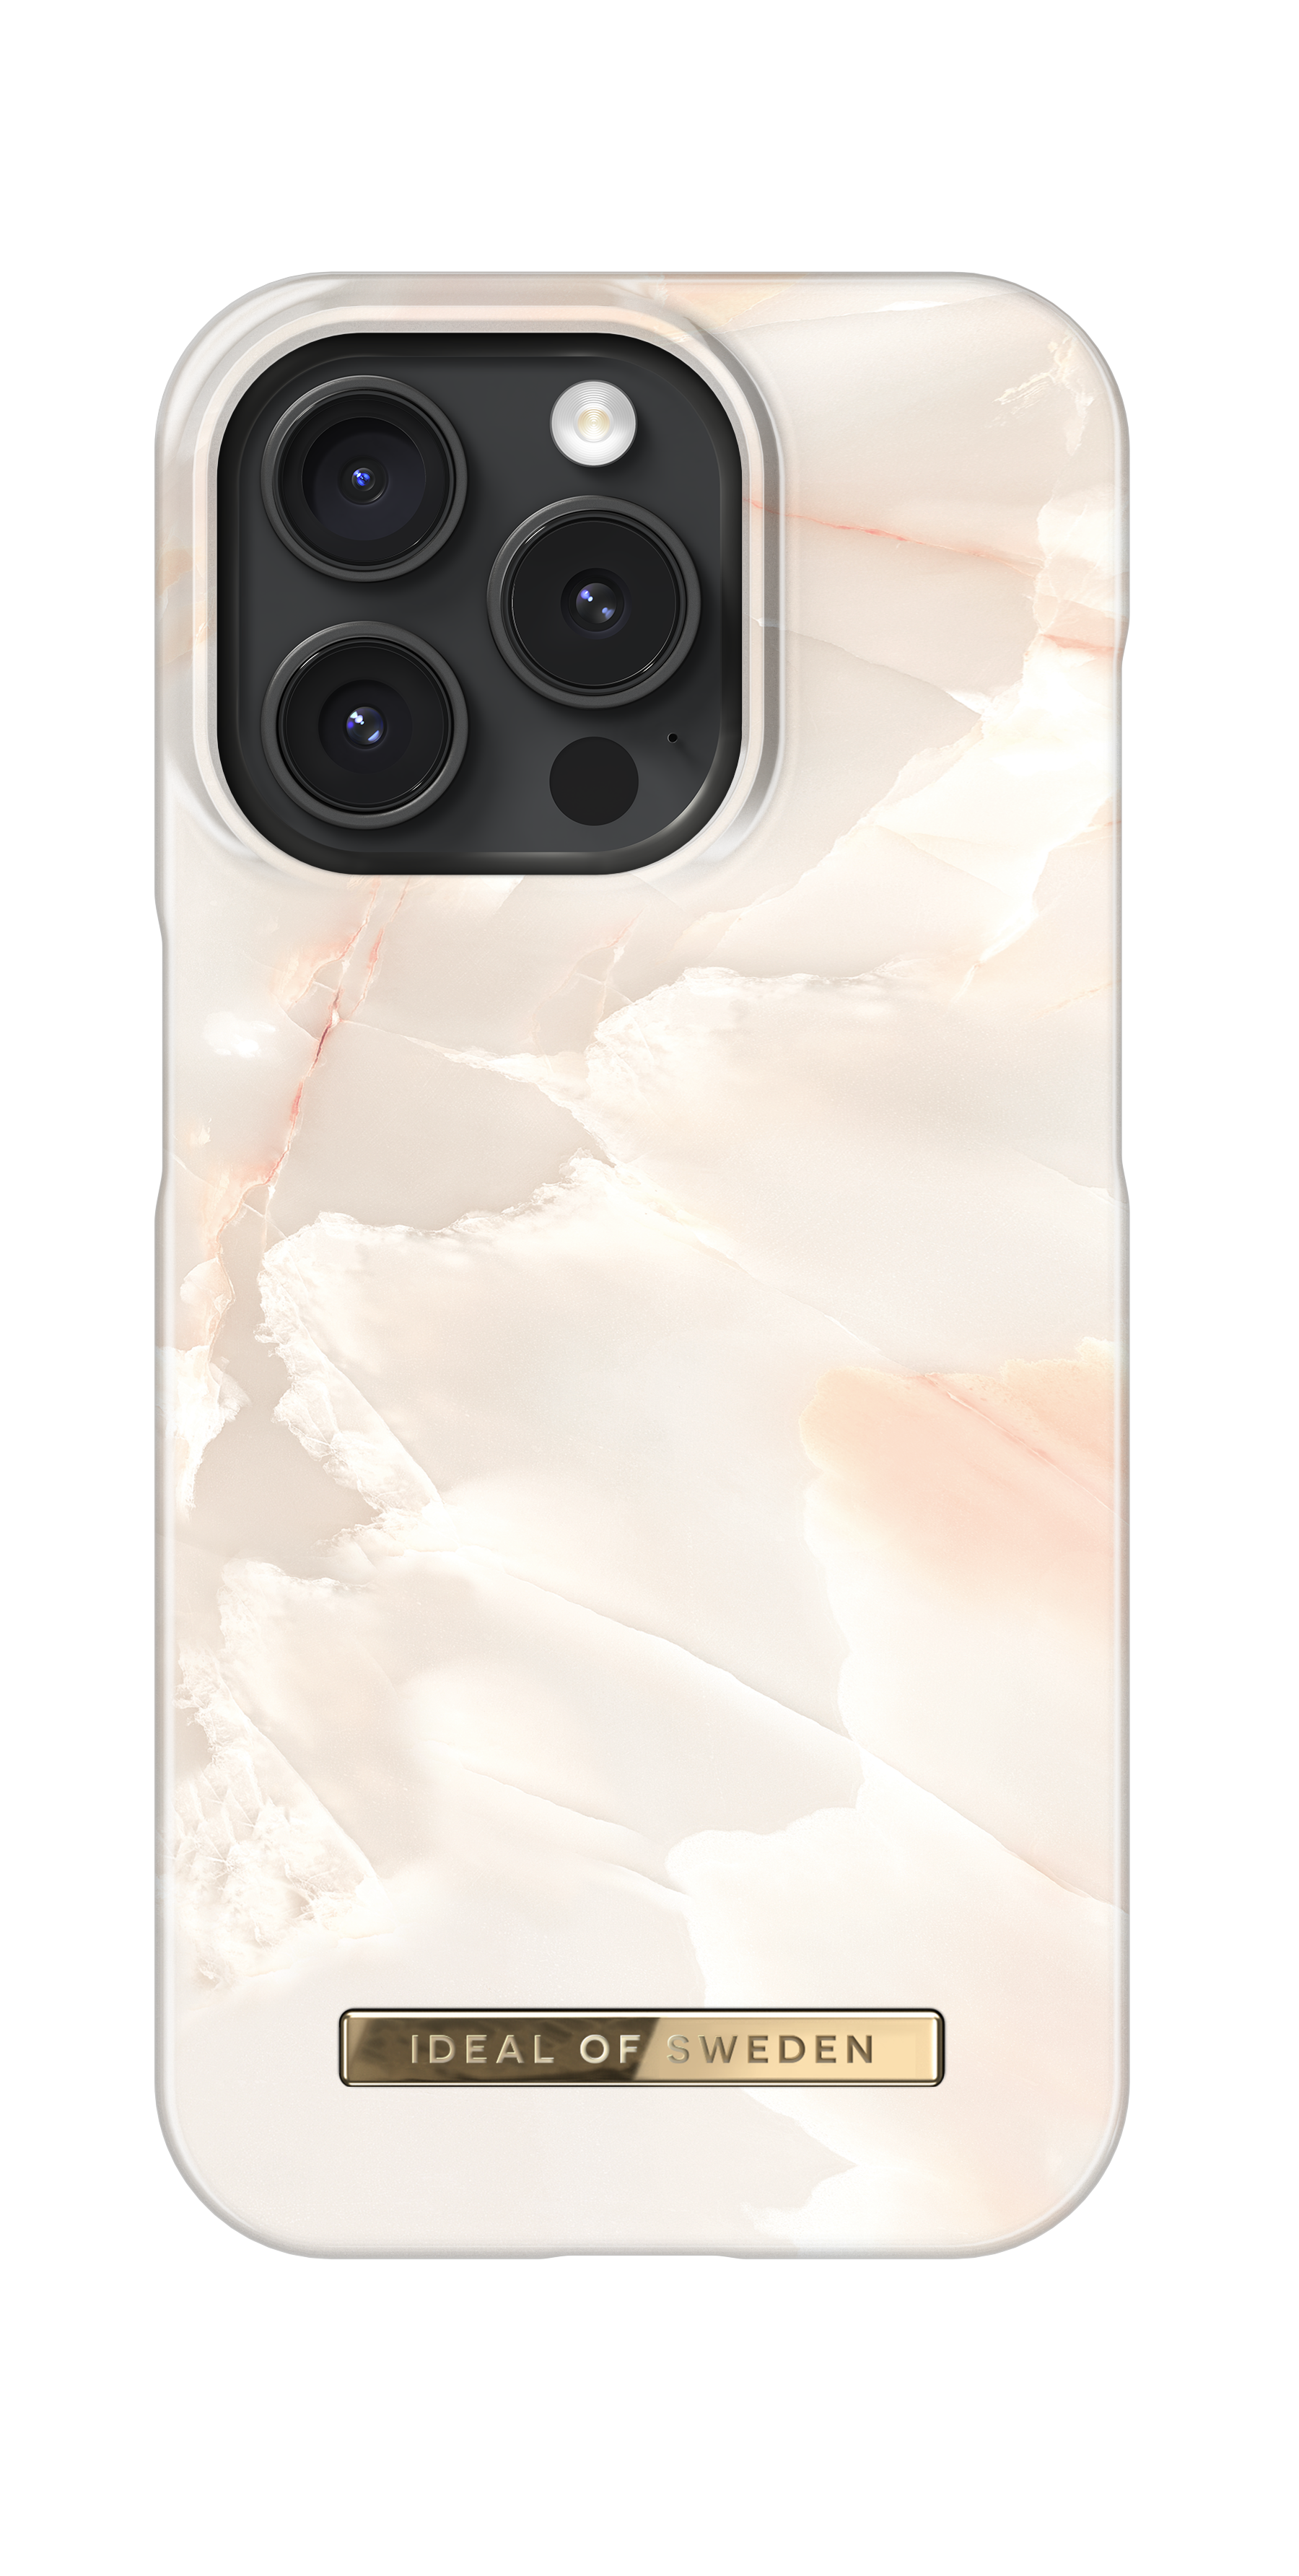 Fashion Cover iPhone 15 Pro Rose Pearl Marble